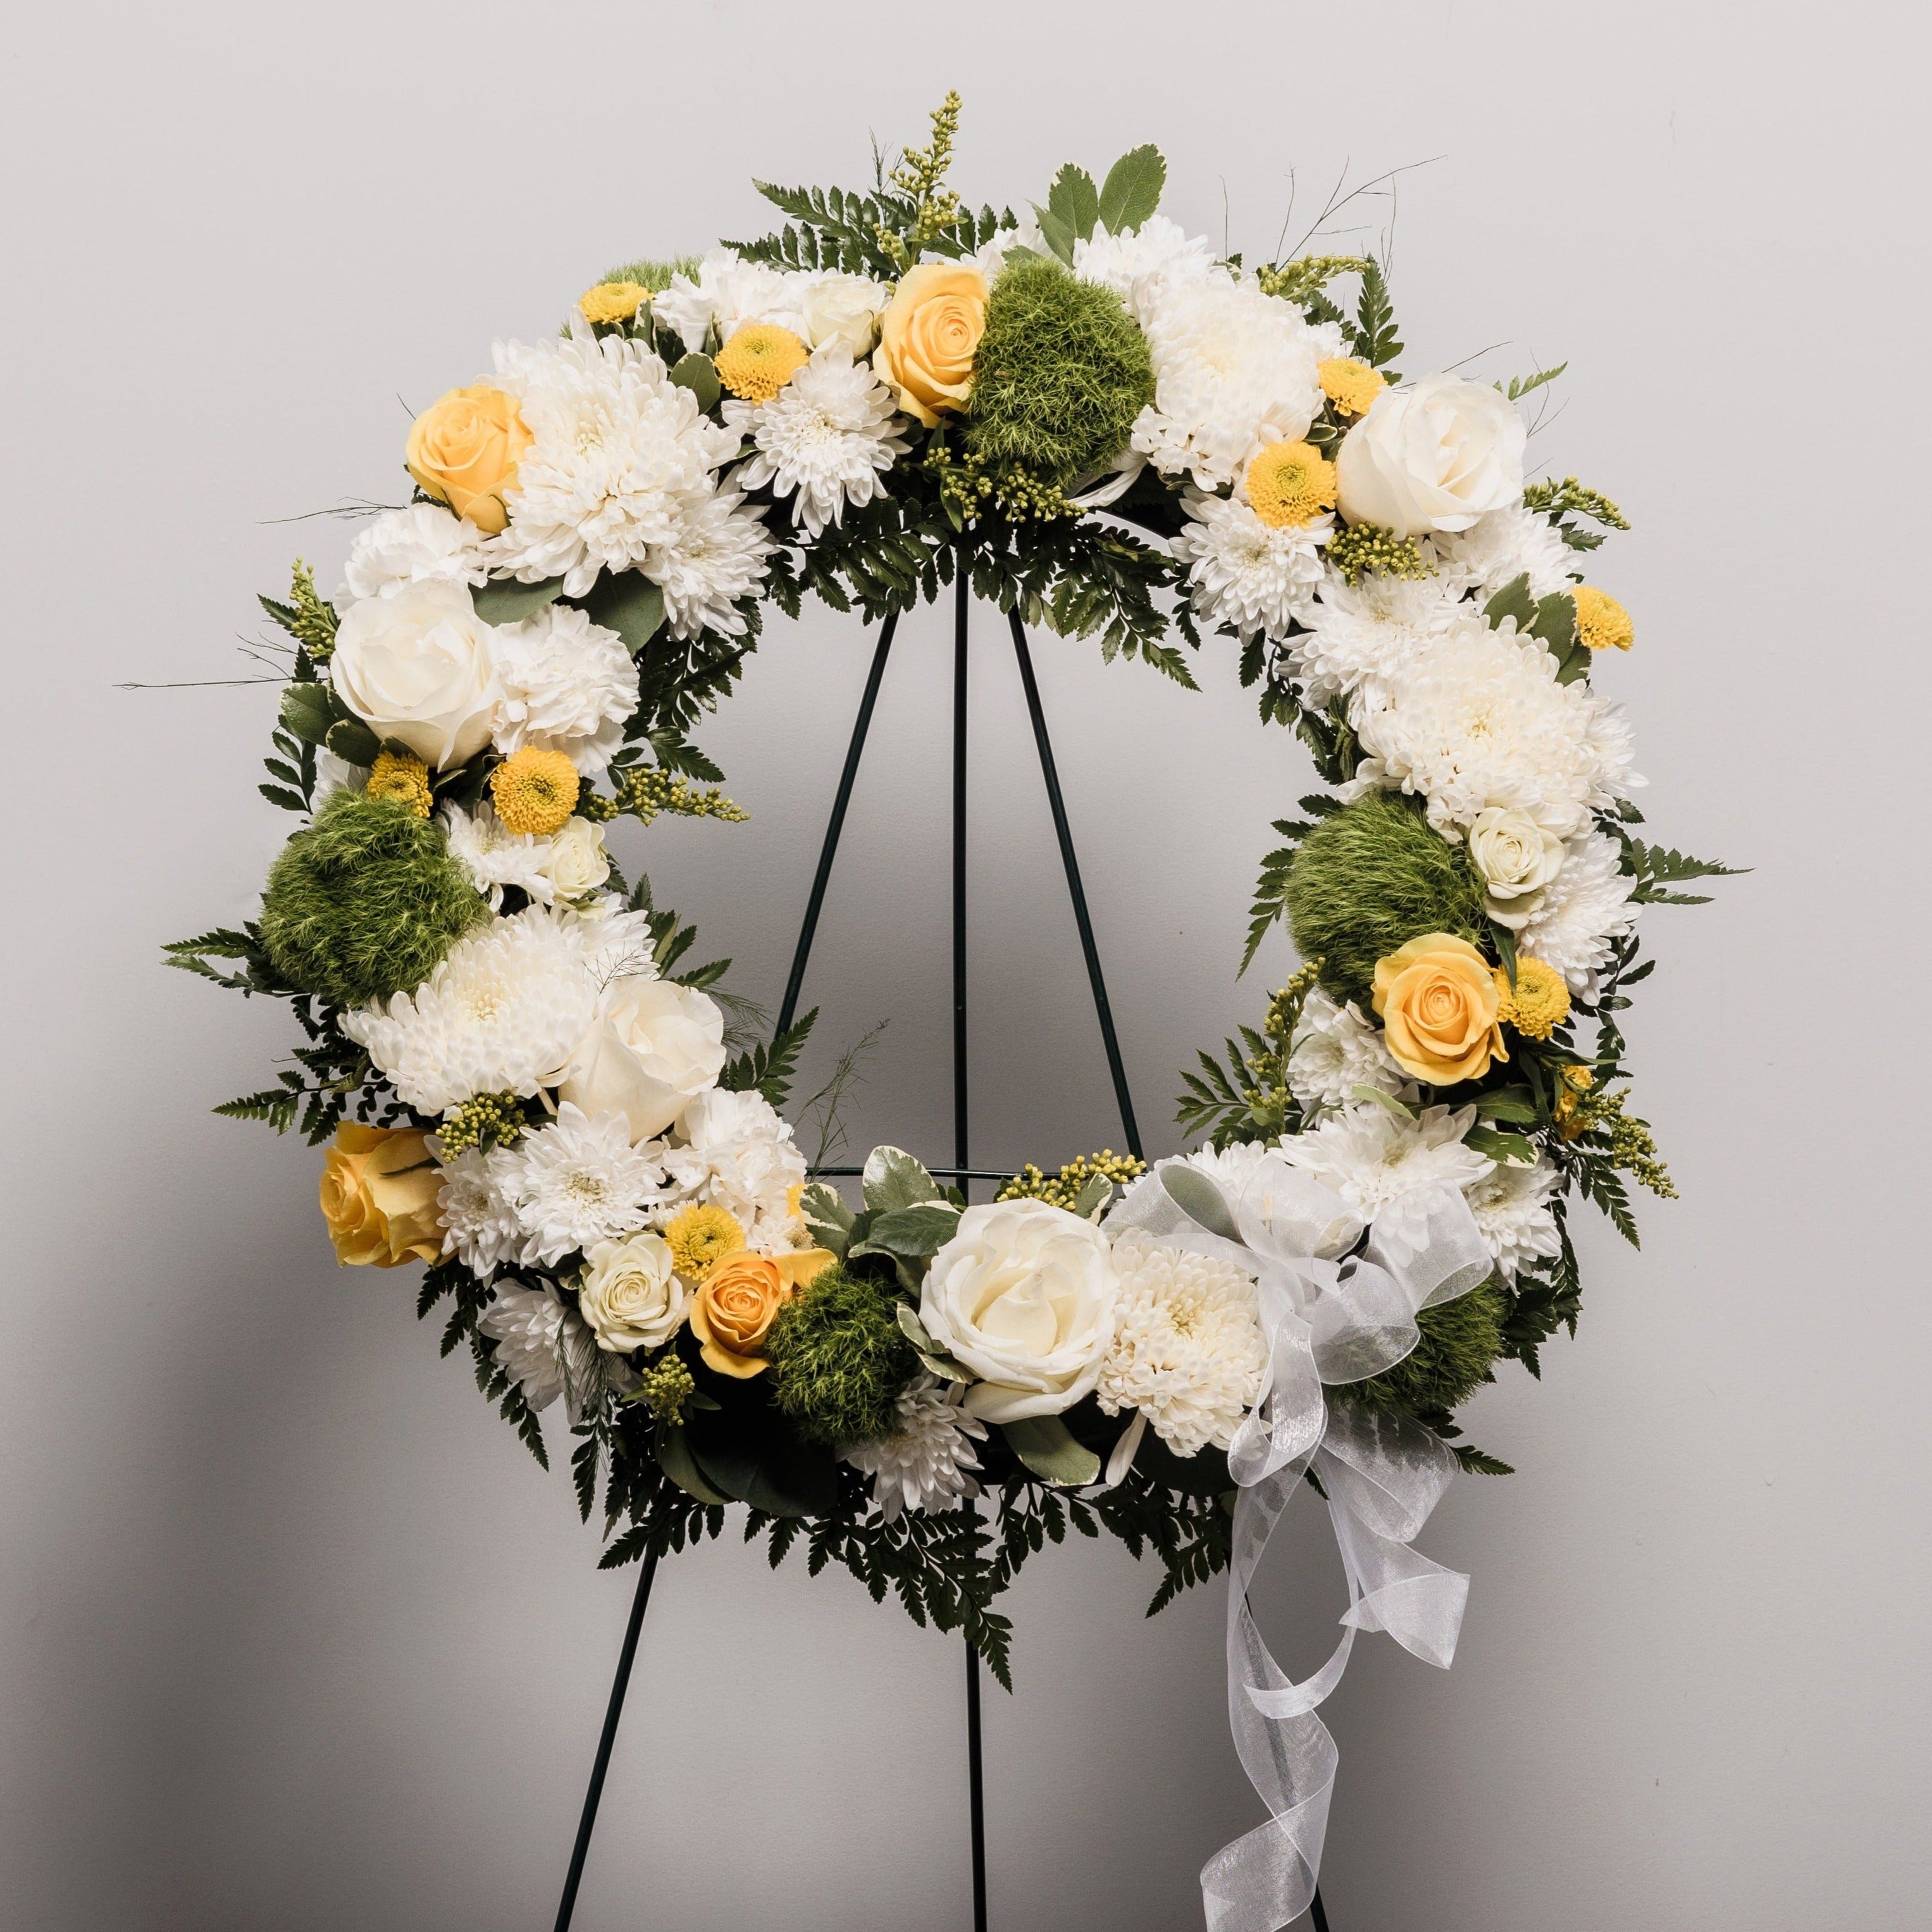 A wreath spray with white, yellow and green flowers.